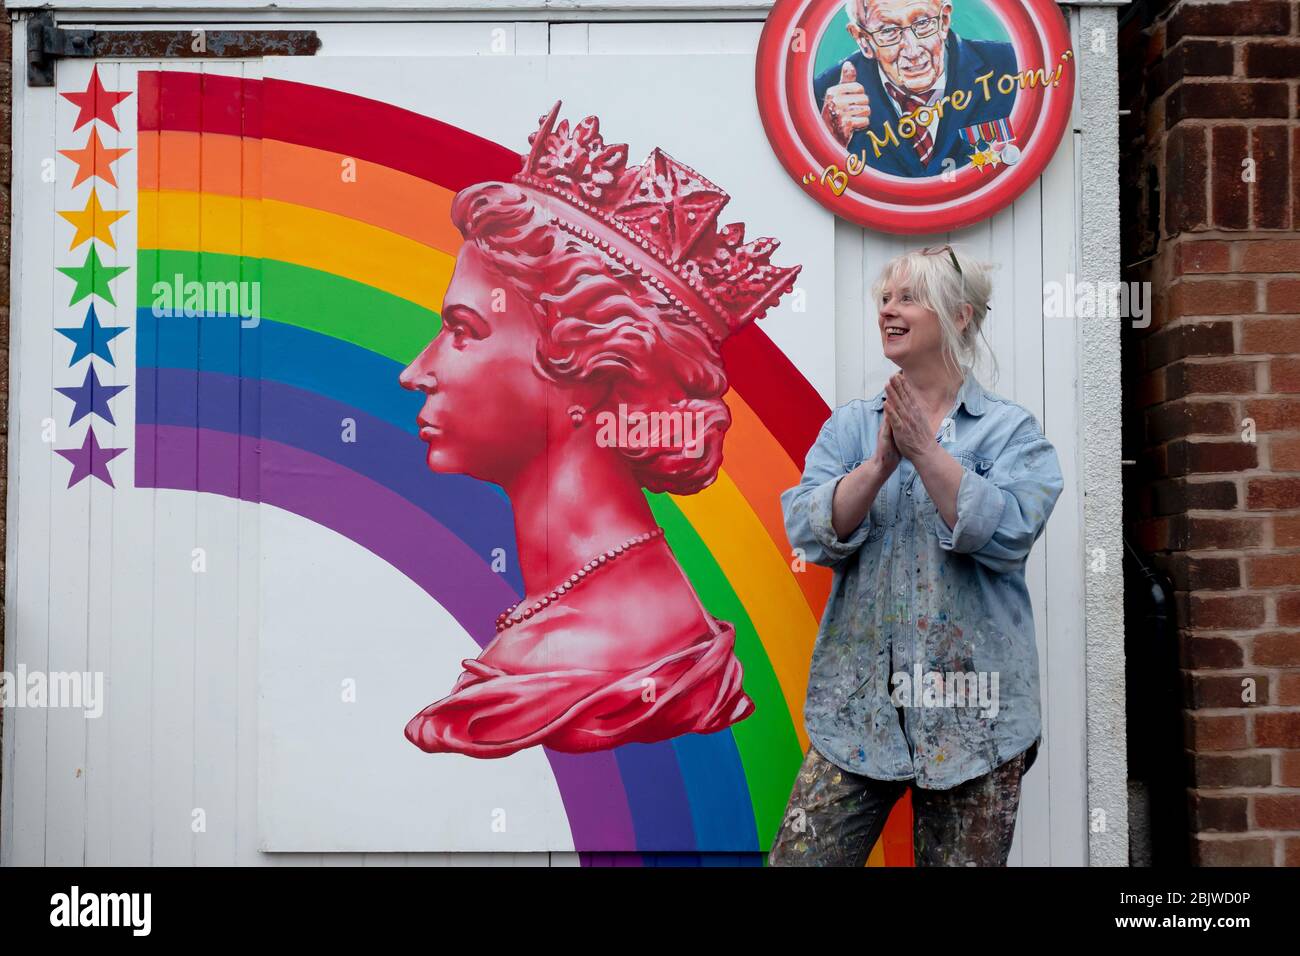 Halesowen, West Midlands, UK. 30th Apr, 2020. Clap for the NHS and frontline workers: theatre set designer Sandra Field, of Halesowen, West Midlands, has painted a beautiful mural on the garage door honouring the NHS and HM Queen Elizabeth with a large portrait of her fom a postage stamp. Credit: Peter Lopeman/Alamy Live News Stock Photo